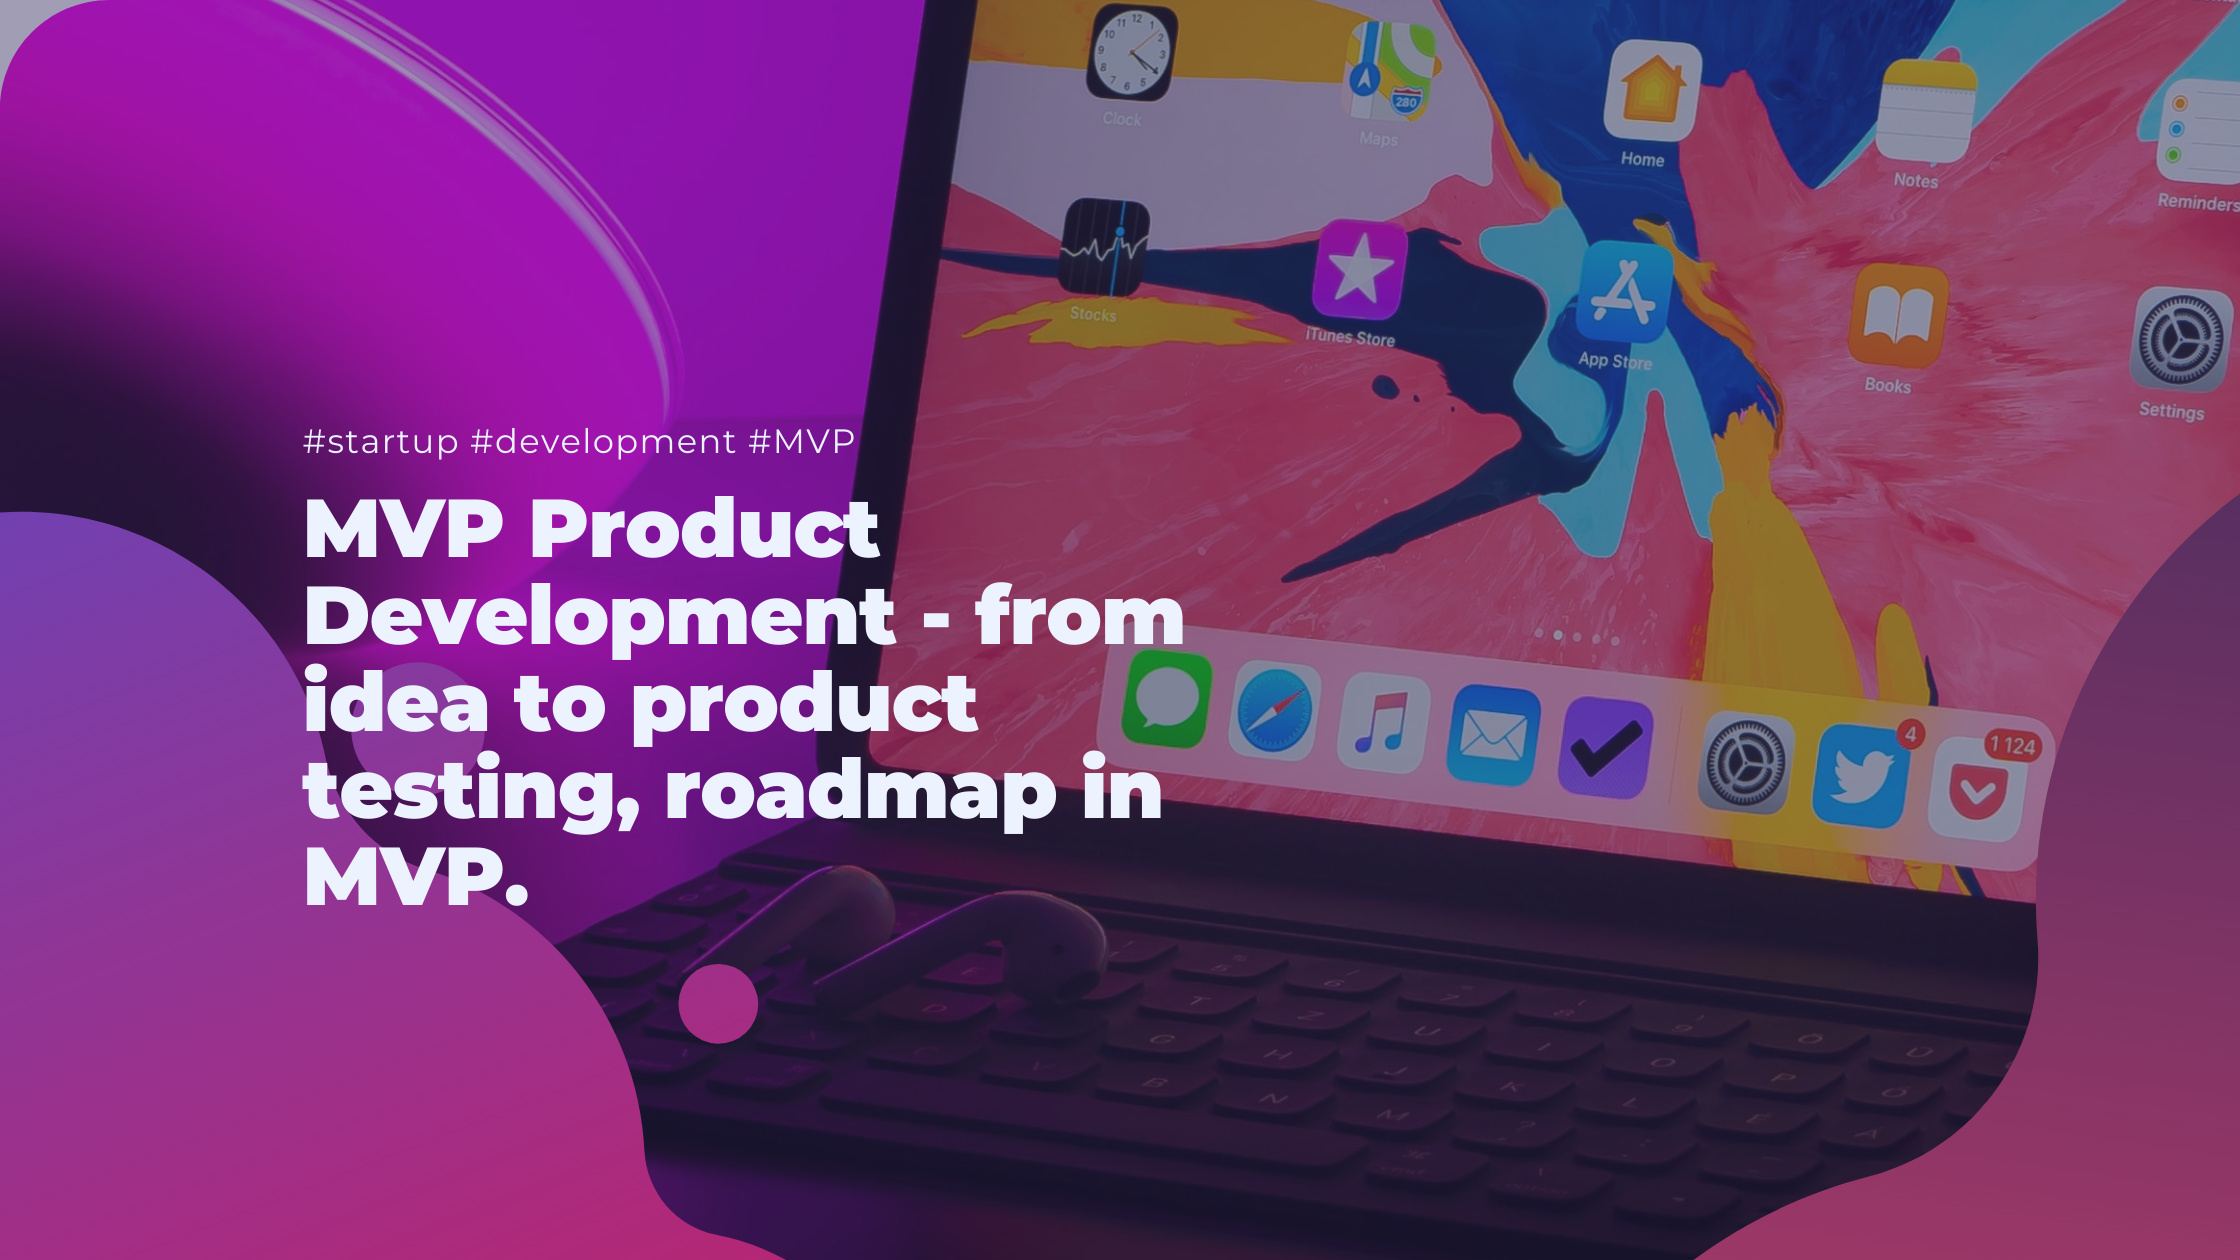 MVP Product Development - from idea to product testing, roadmap in MVP.